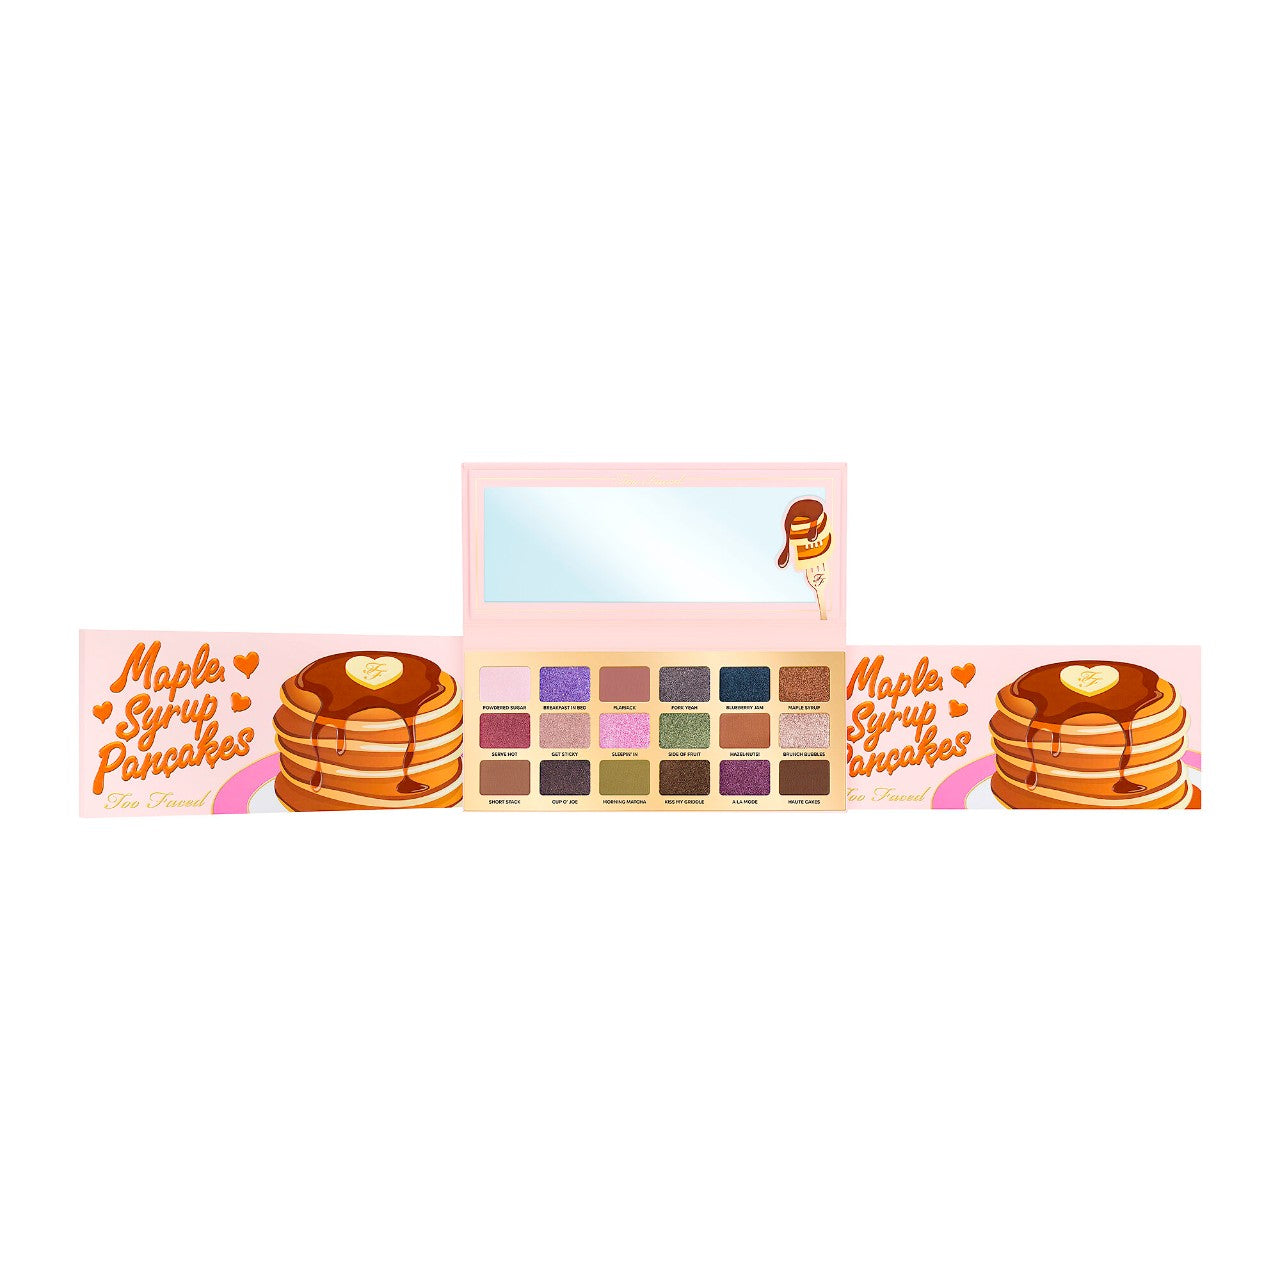 Too Faced, Maple Syrup Pancakes Eyeshadow Palette